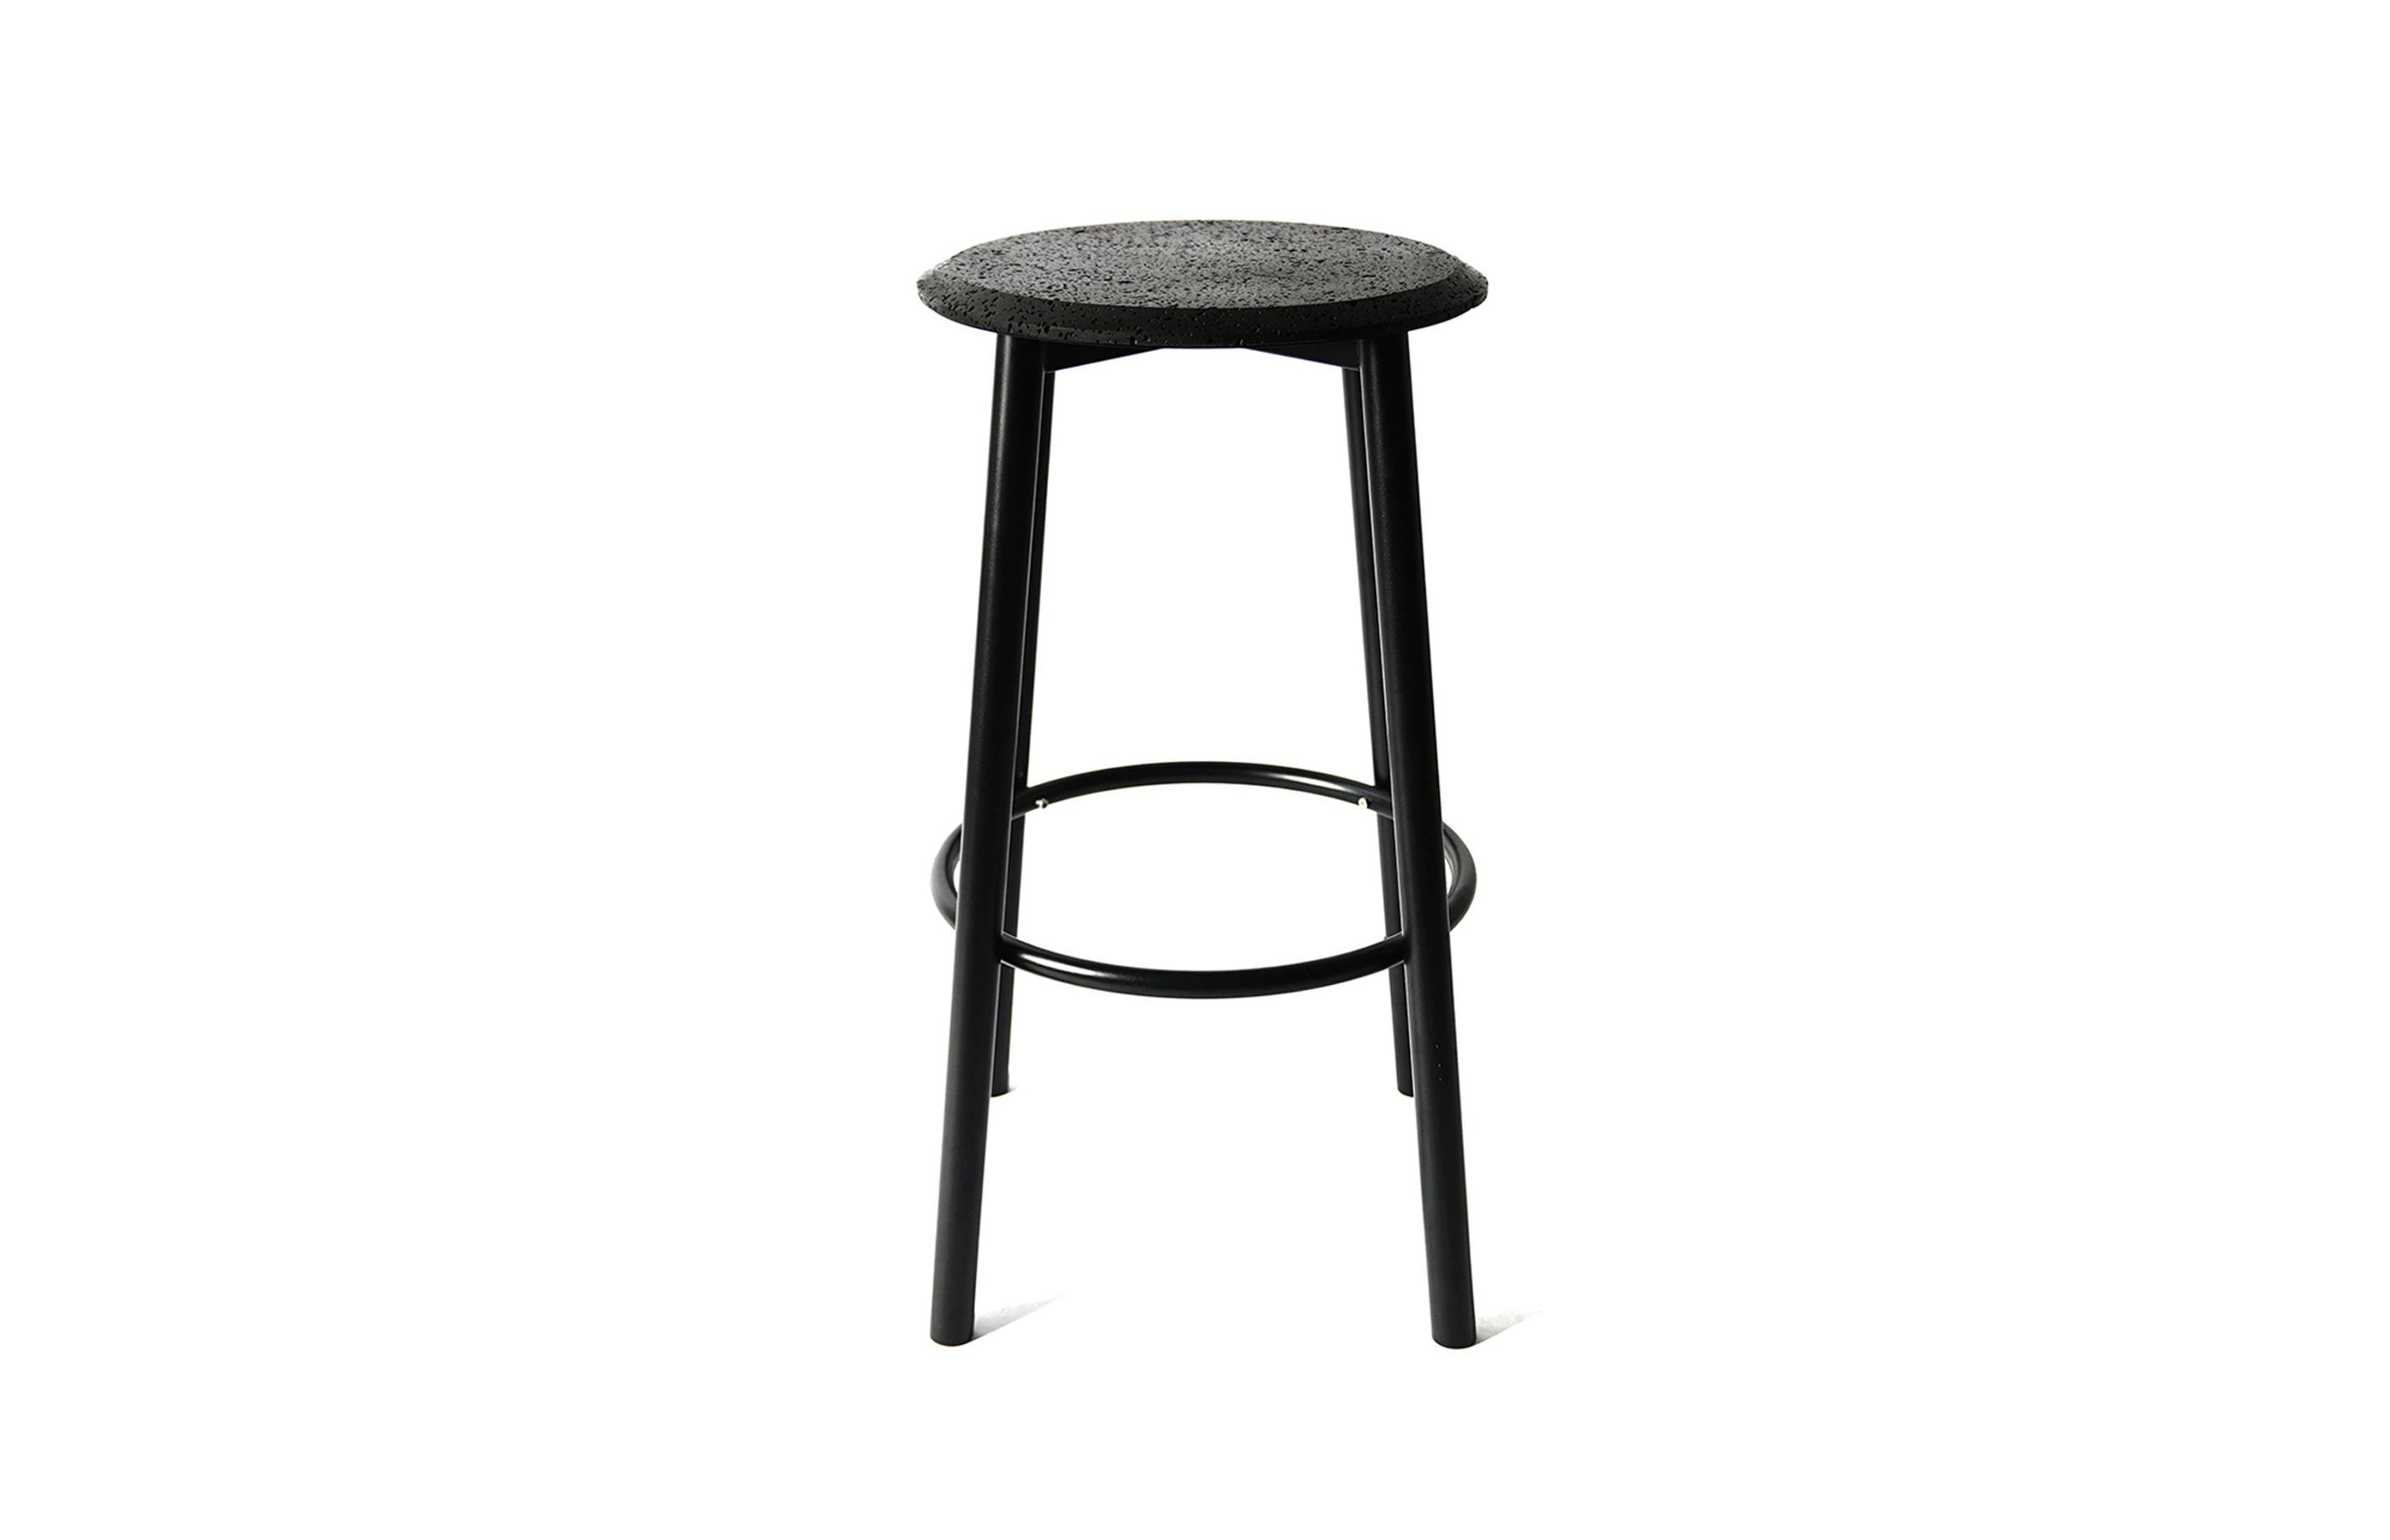 Buzao 'Calm' bar stool by Remodern